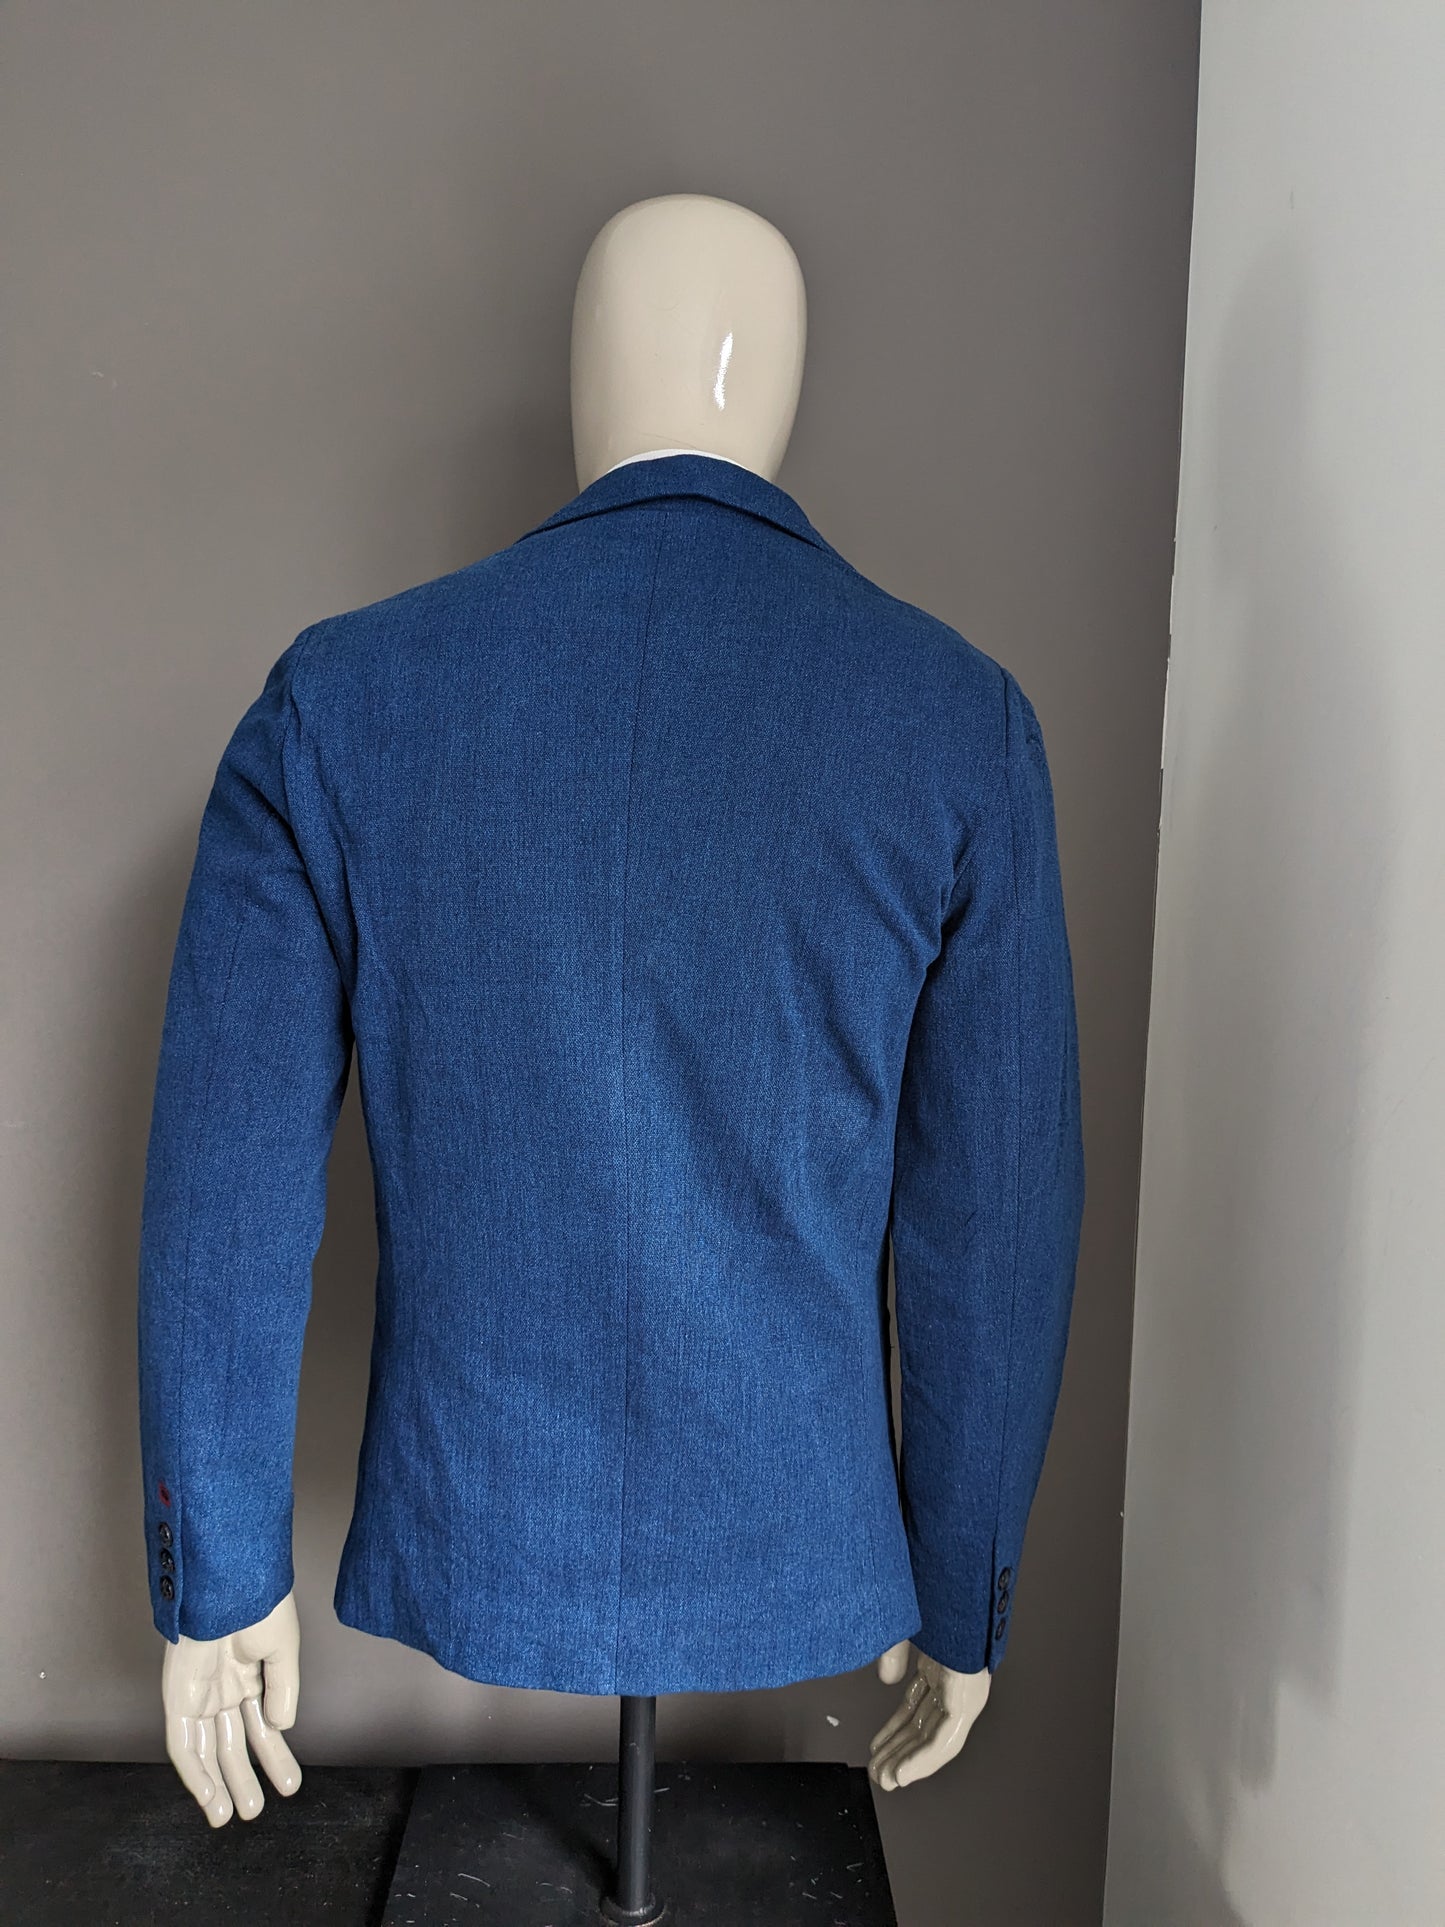 Refill Casual Colbert. Blue mixed jeans look. Size L.